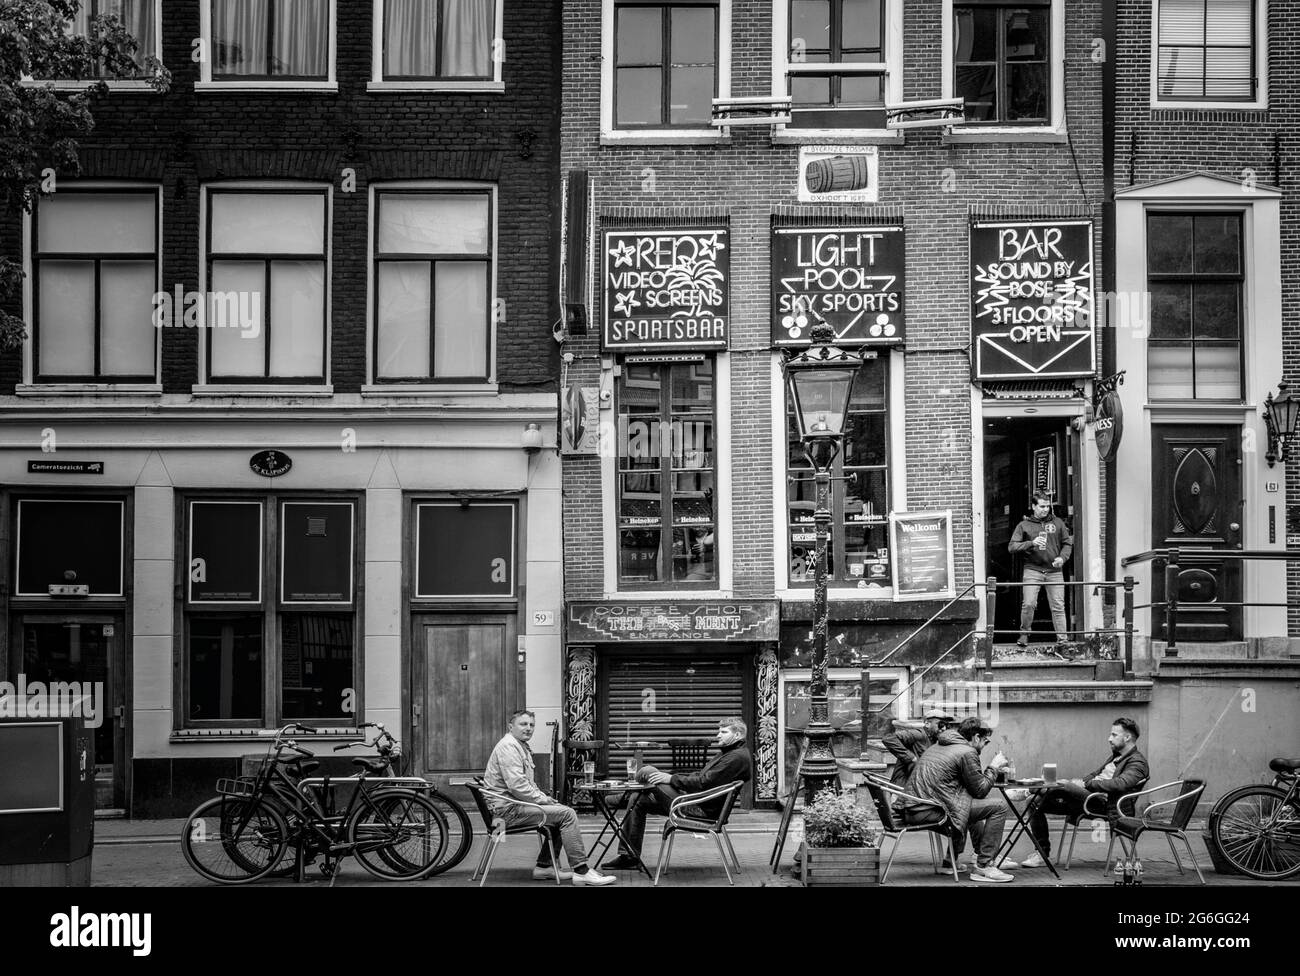 AMSTERDAM, NETHERLANDS. JUNE 06, 2021. Beautiful facades of the old dutch buildings. Restaurants on the street. Black and white photography. Stock Photo